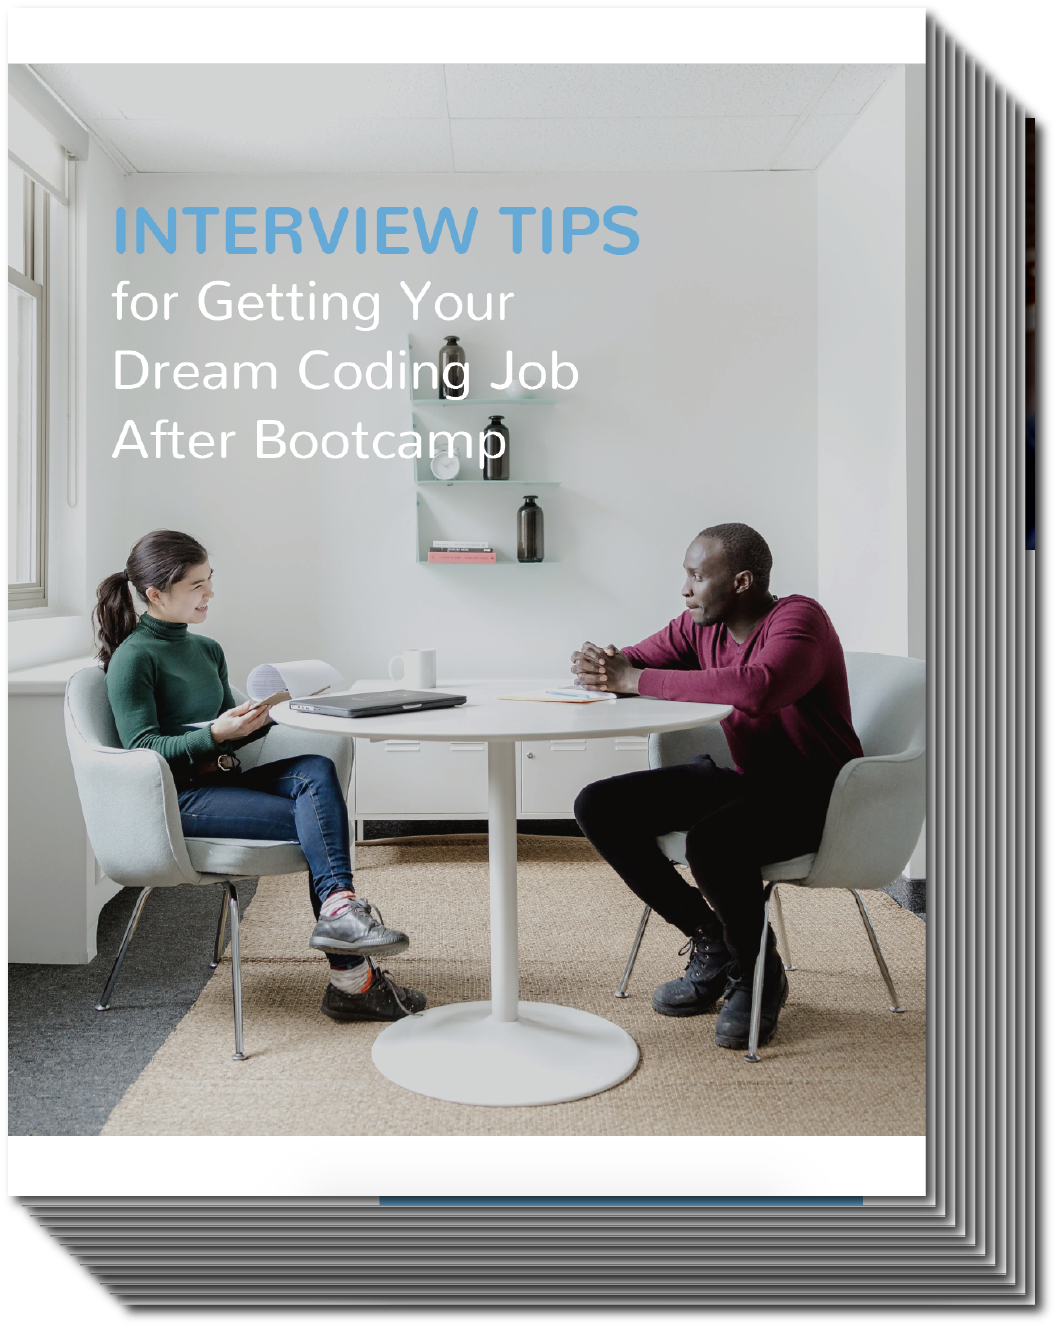 Interview Tips for Getting Your Dream Coding Job After Bootcamp